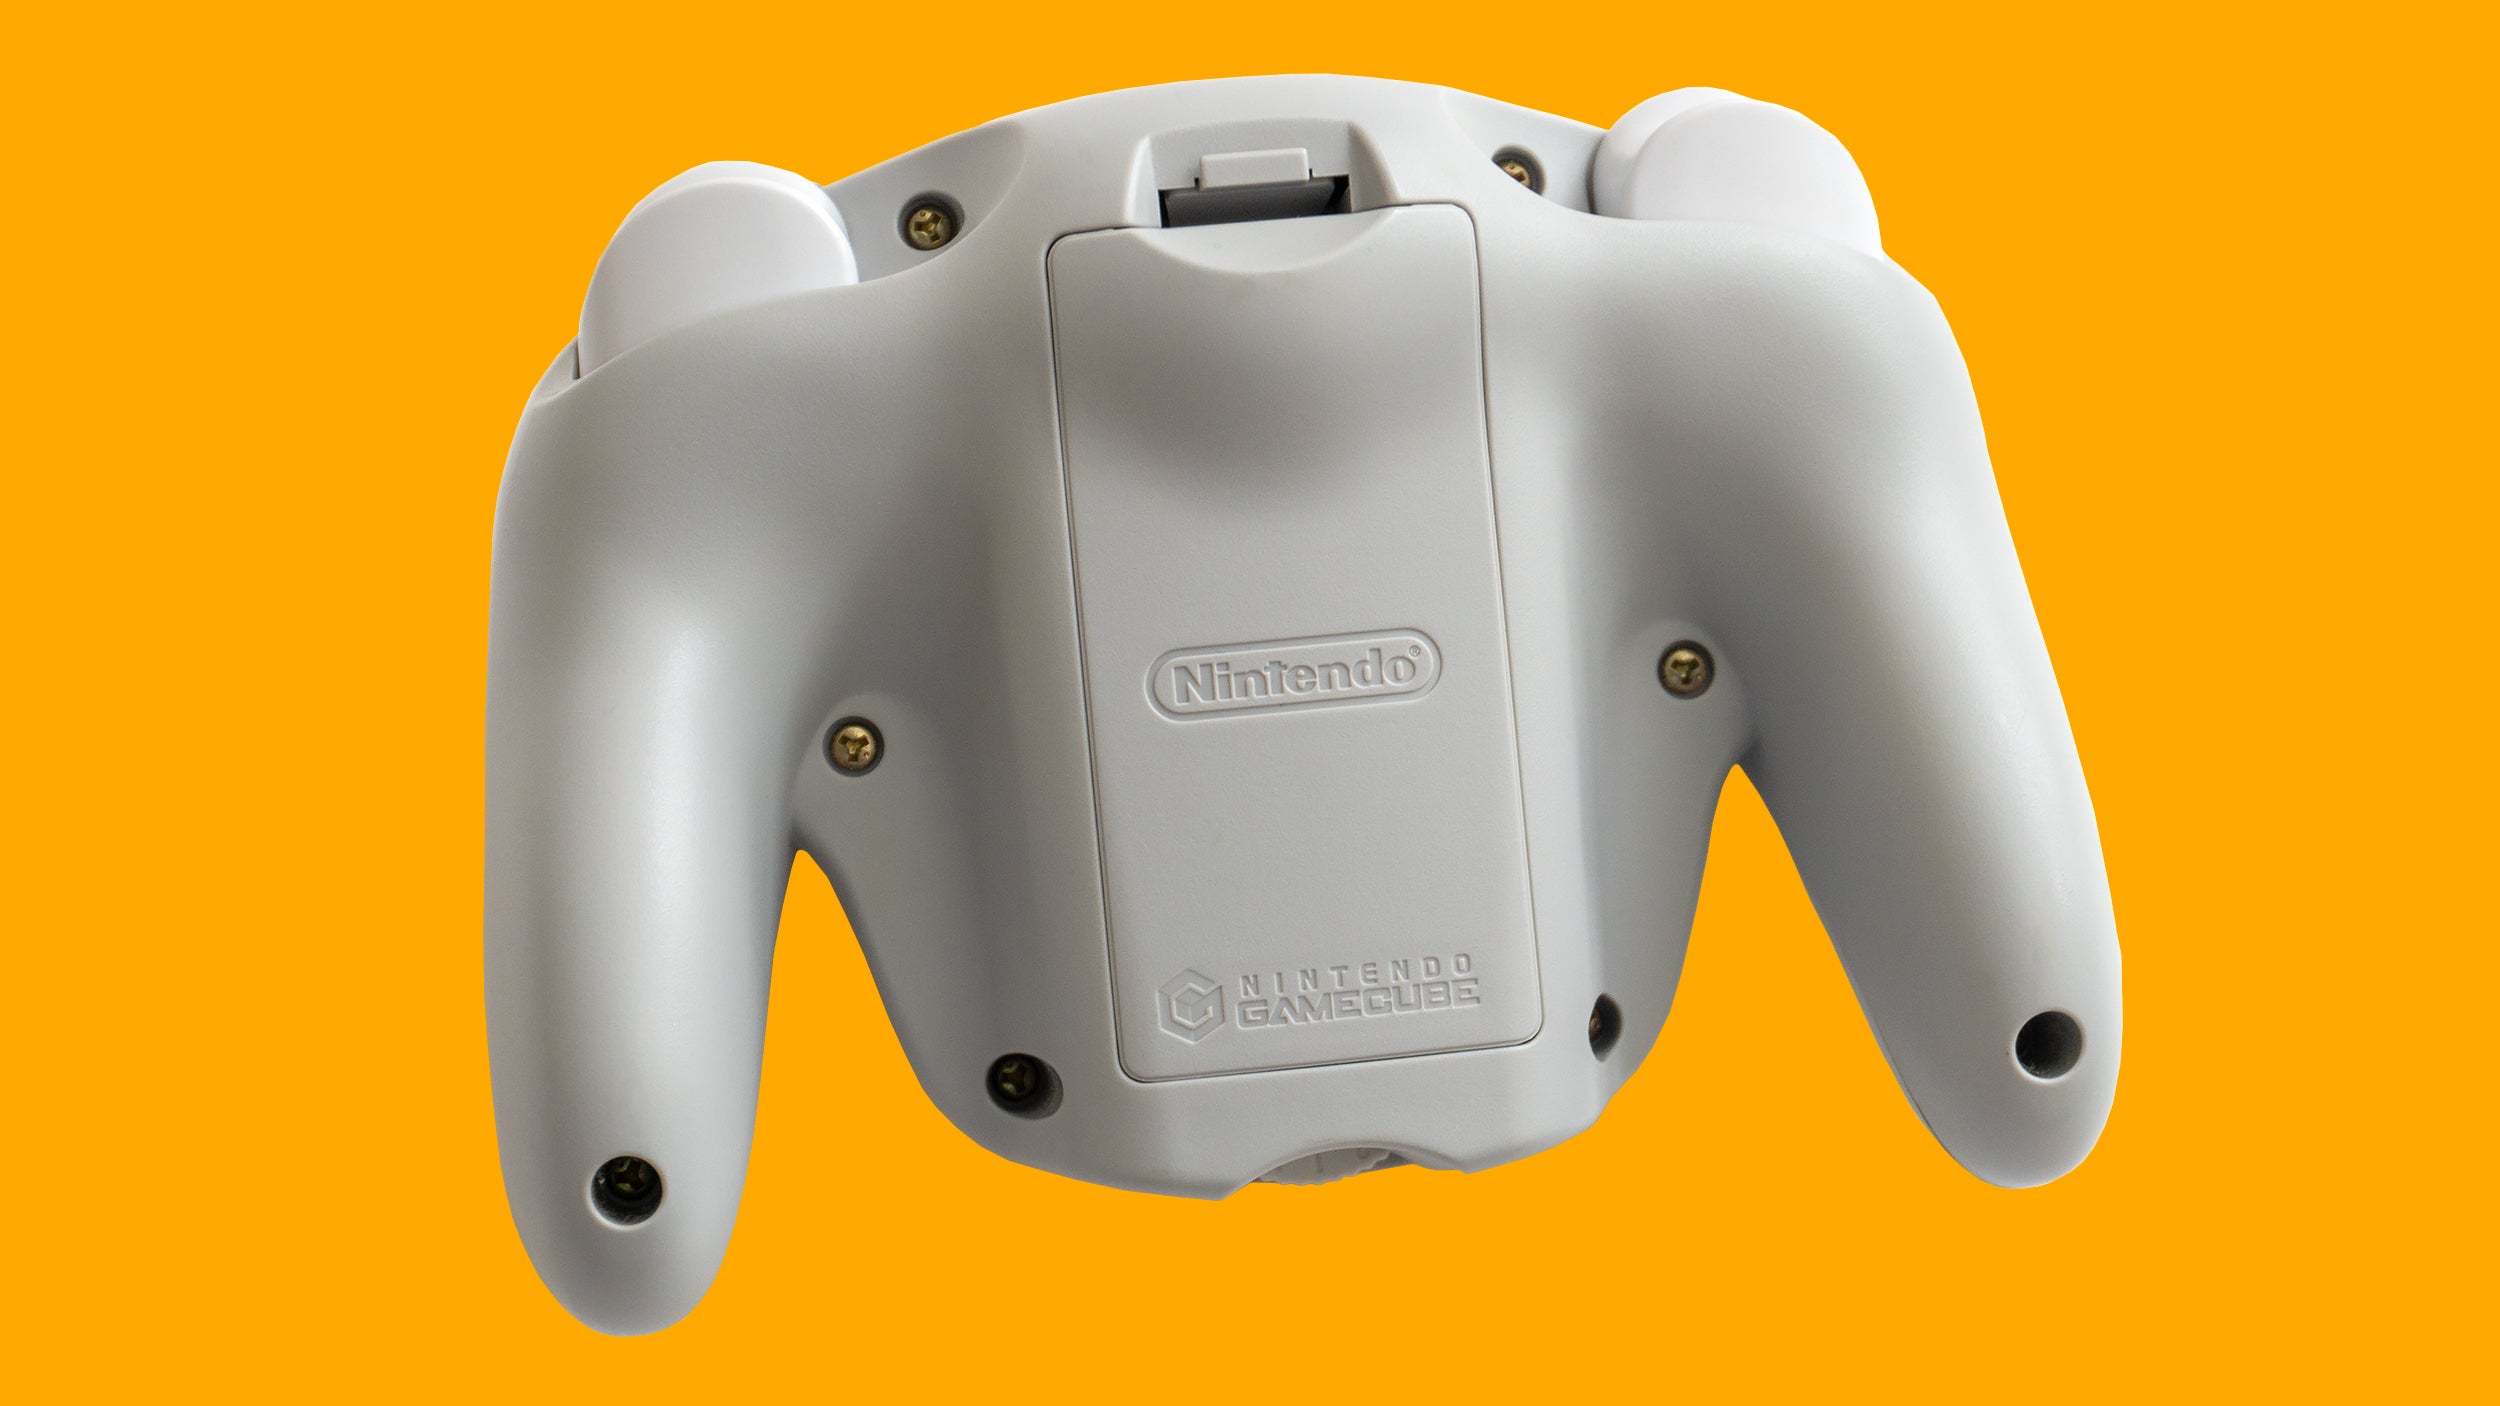 Nintendo's first wireless controller was definitely on the chunky side and relied on a pair of AA batteries, but it was a small price to pay for finally saying goodbye to controller cables. (Photo: Andrew Liszewski - Gizmodo)